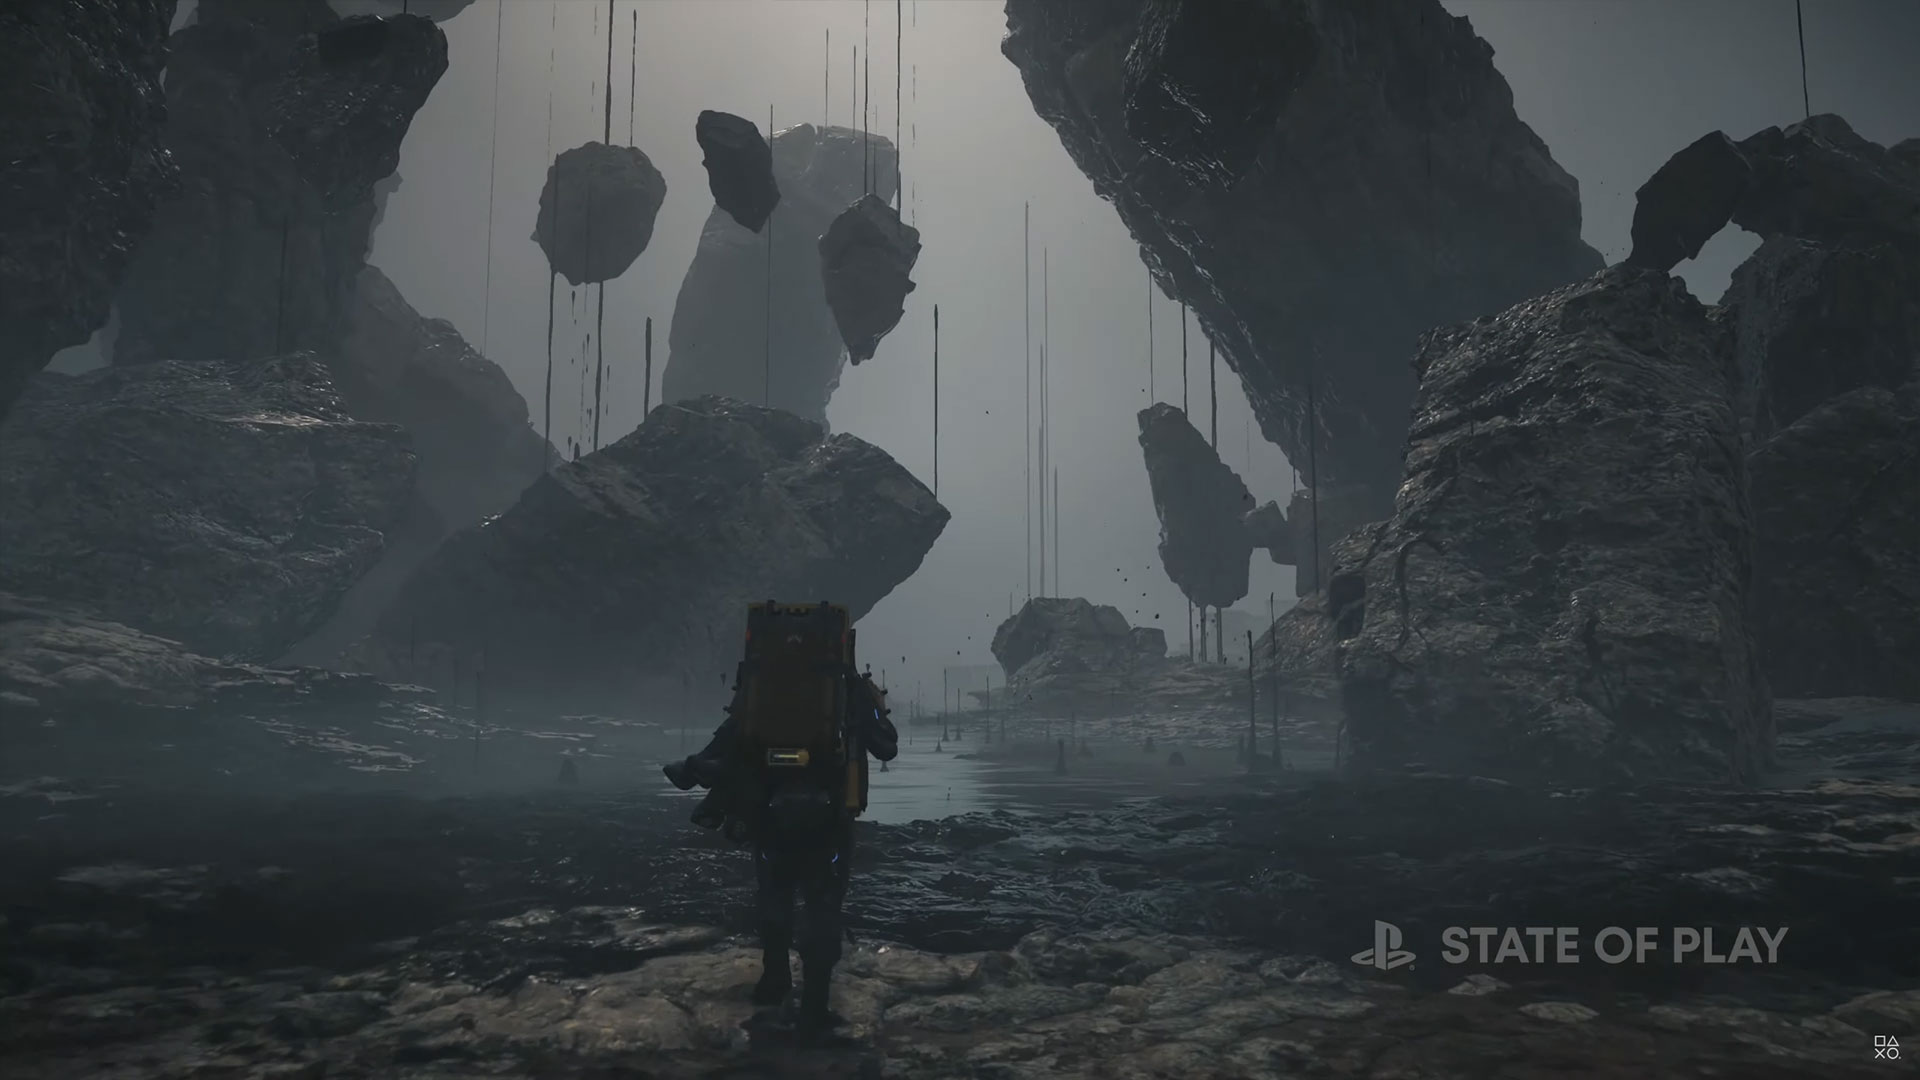 We got our first extensive look at Death Stranding 2 during today's State of Play